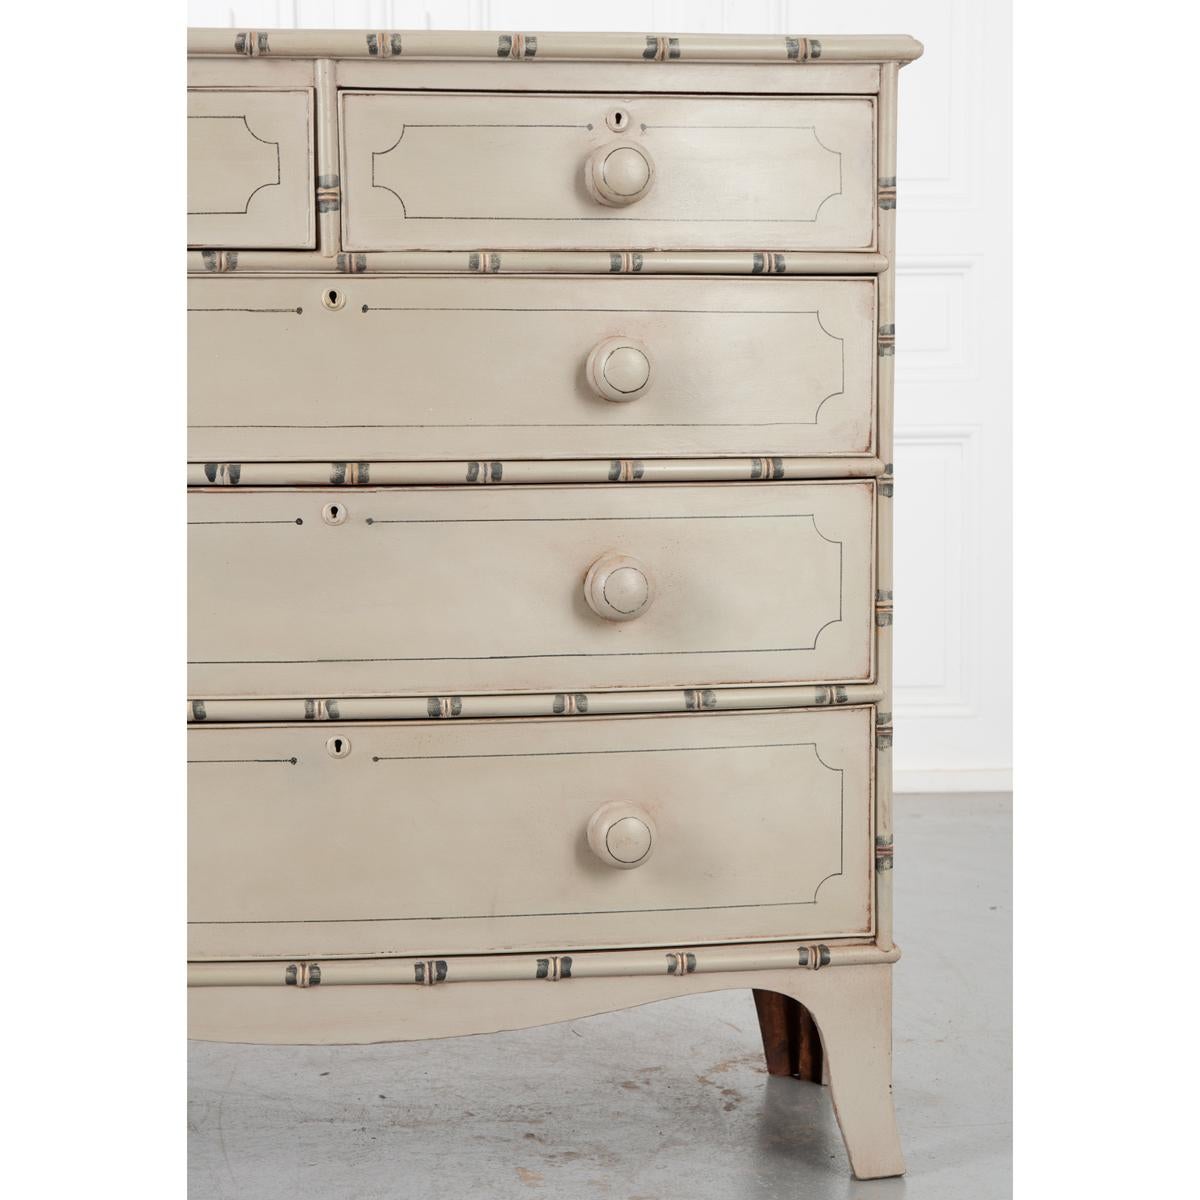 19th Century English Faux Bamboo Painted Pine Chest